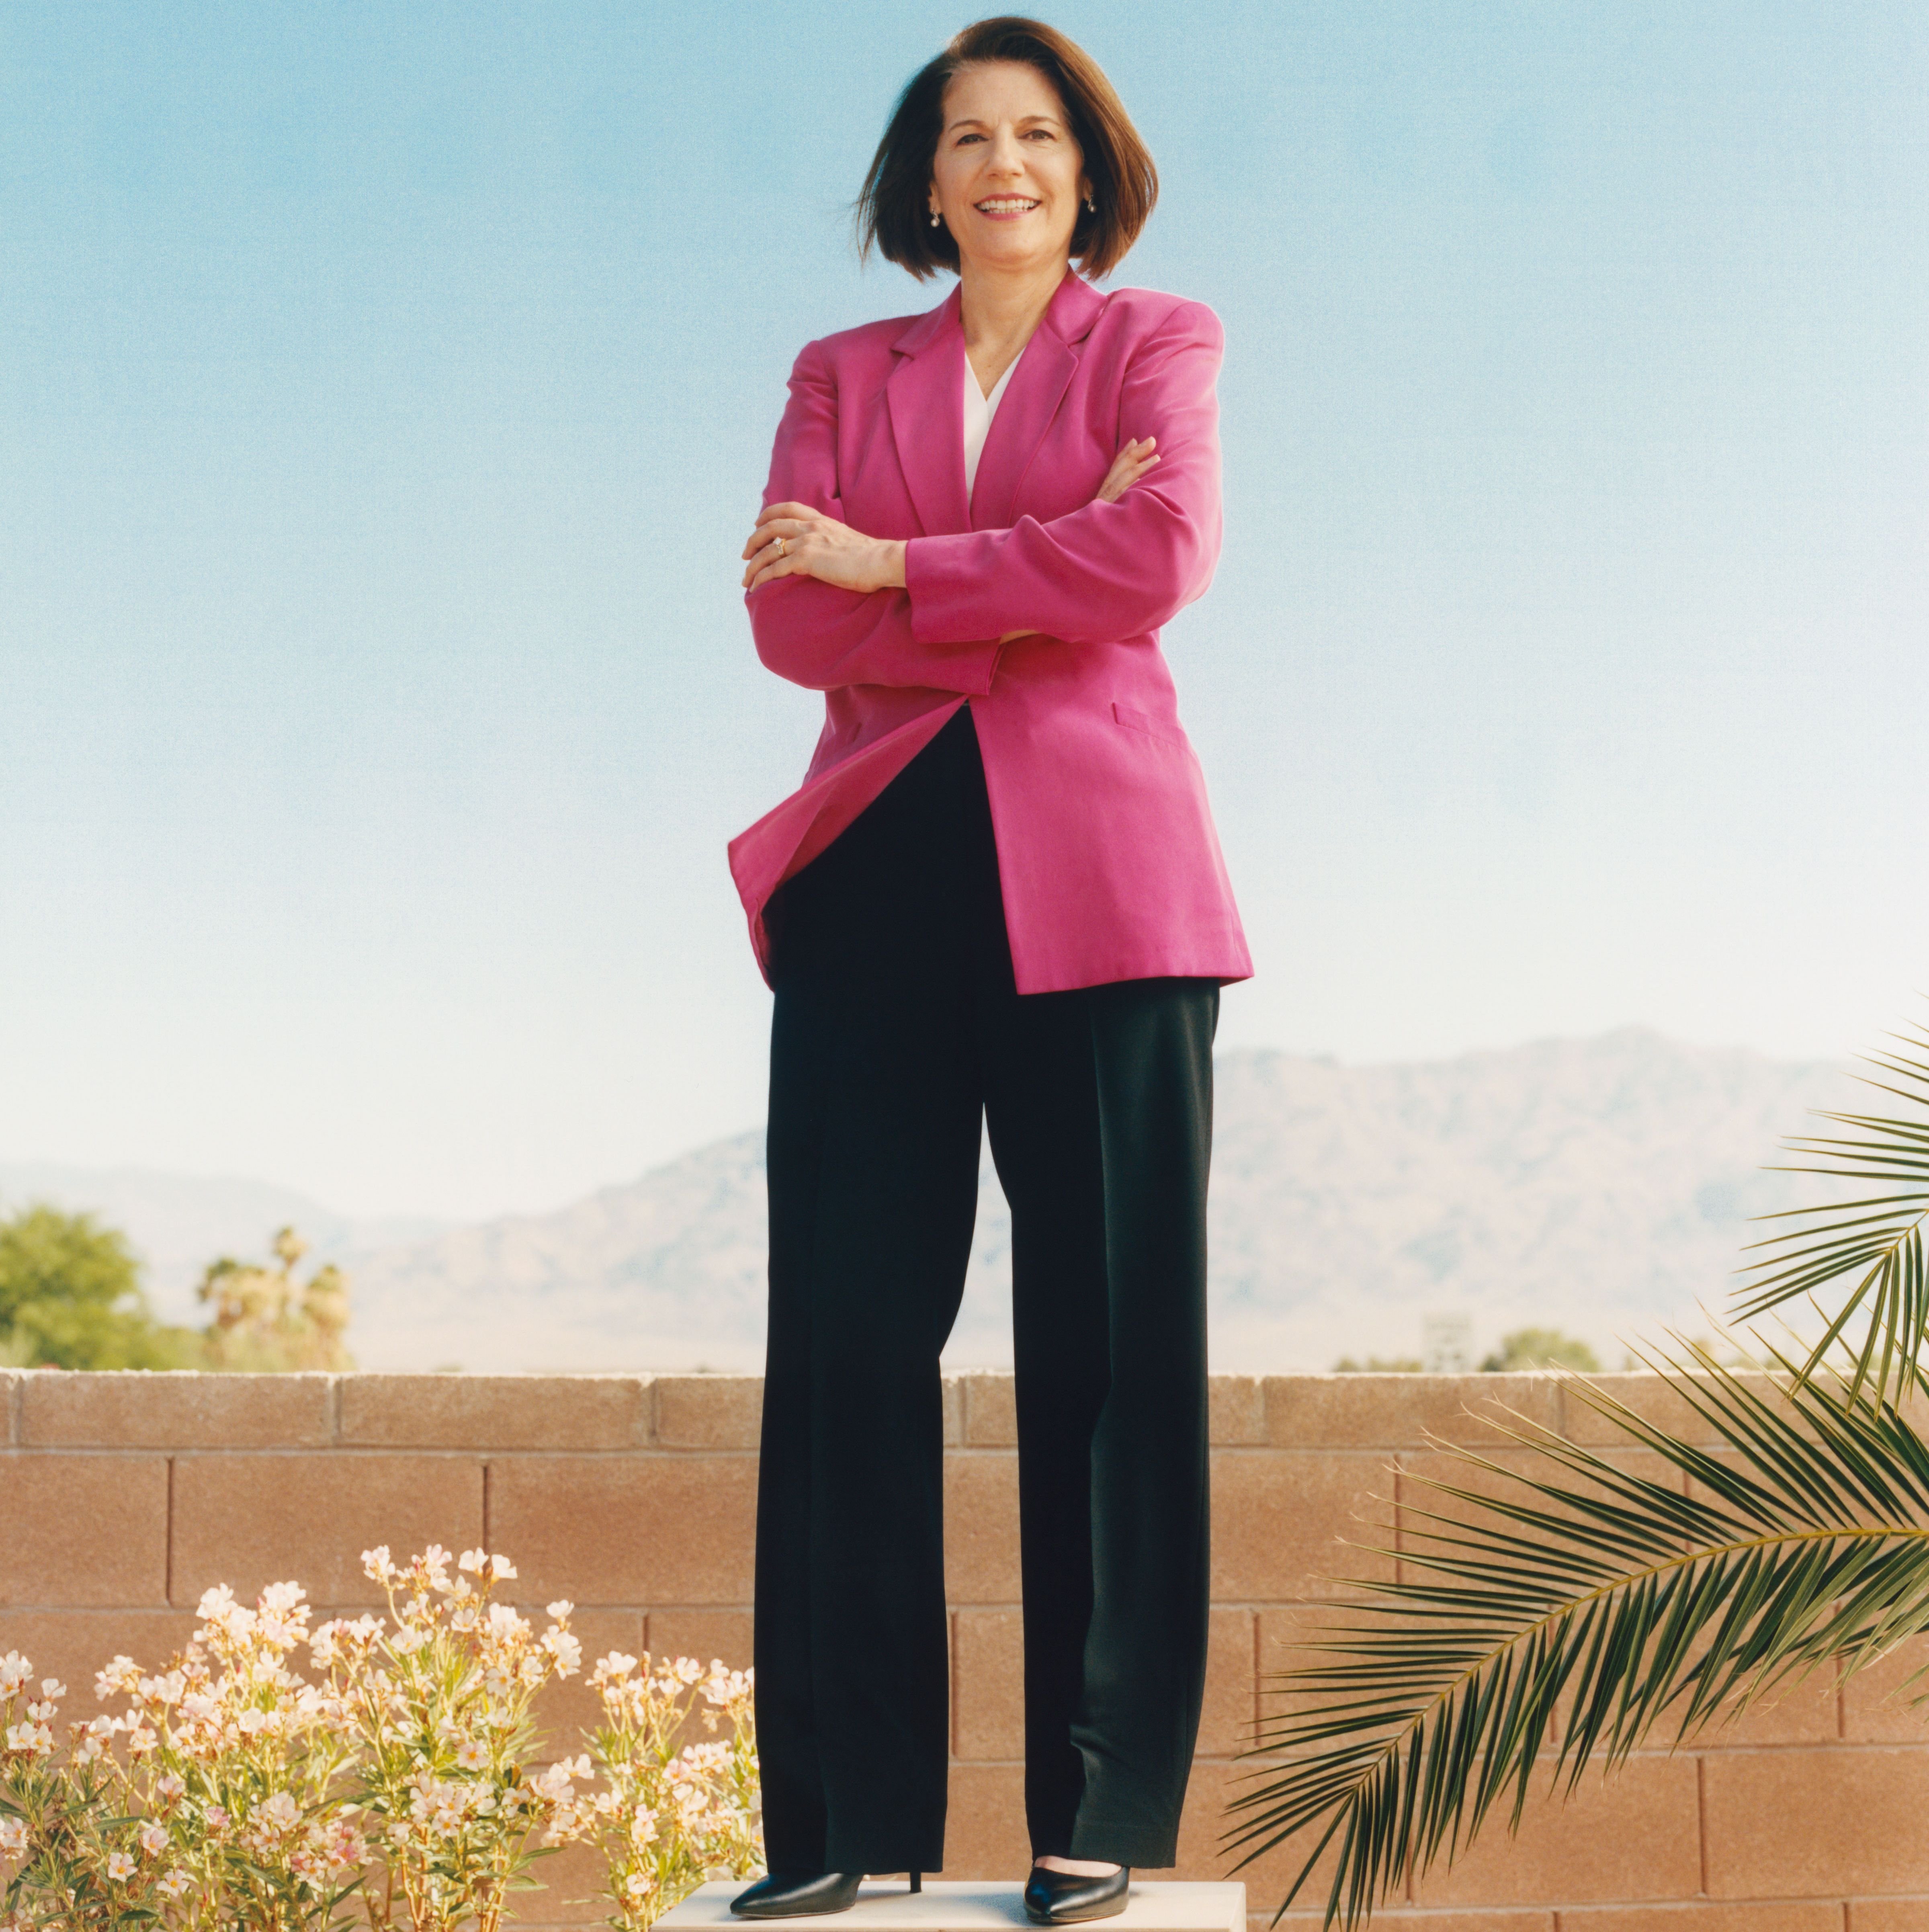 Catherine Cortez Masto, the only Latina in the U.S. Senate, is fighting to keep her seat in one of the most-watched races of the midterms.